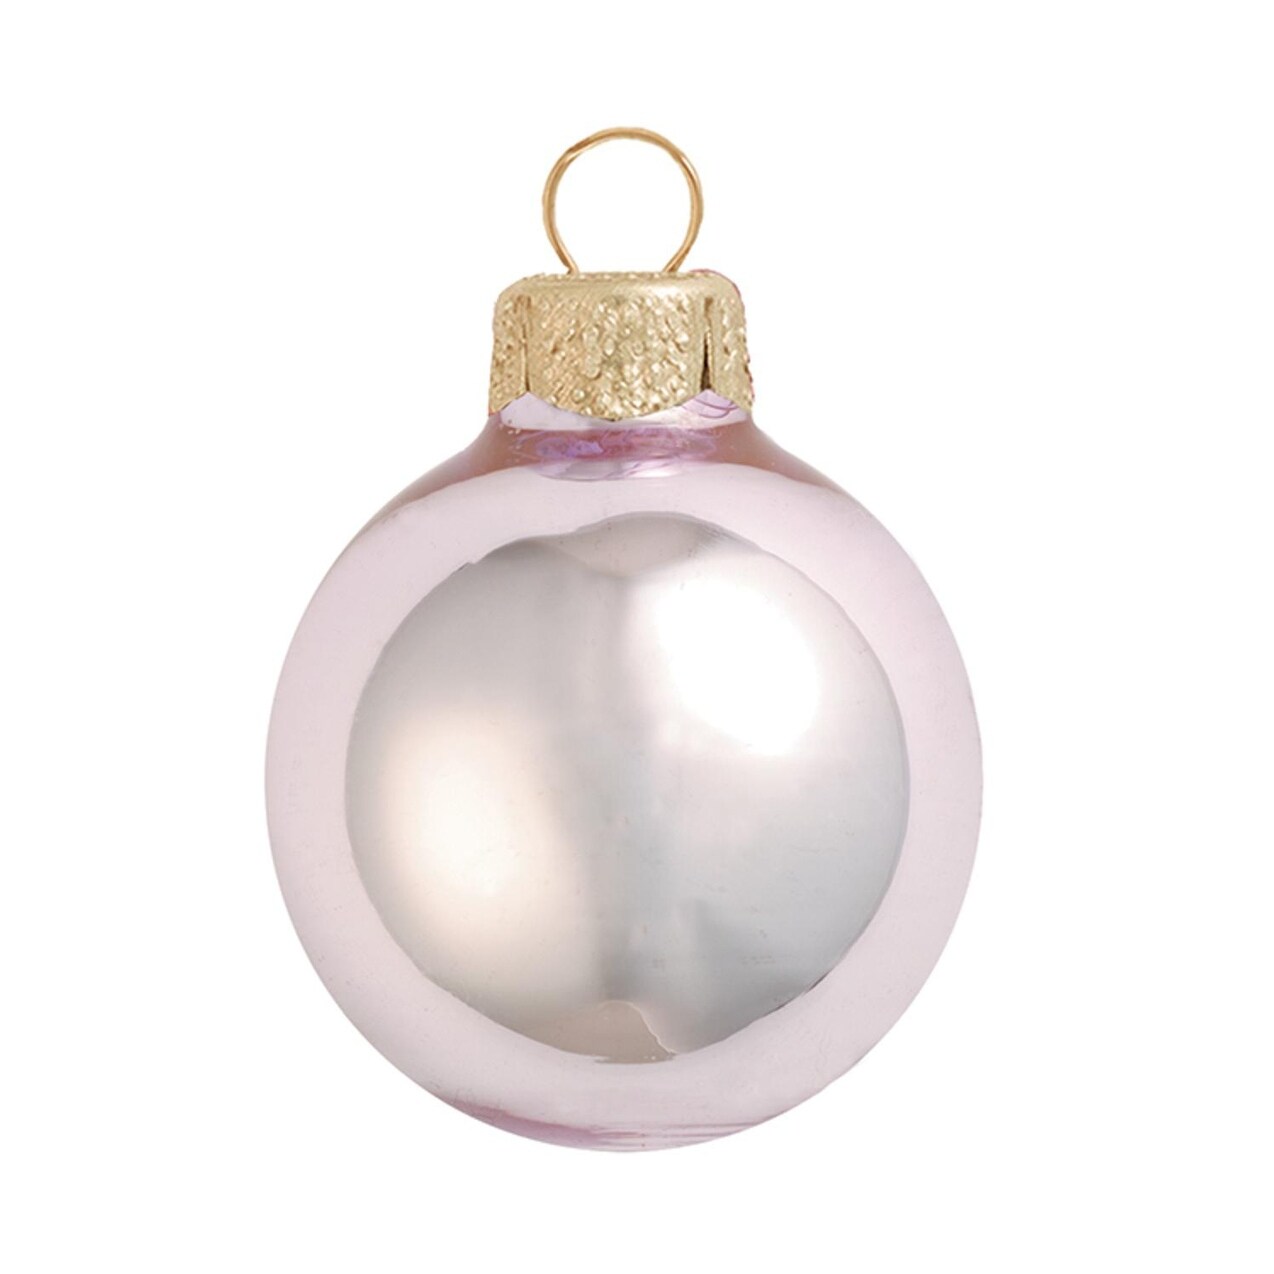 Package of 12 Clear Plastic Ornament Balls - 100mm